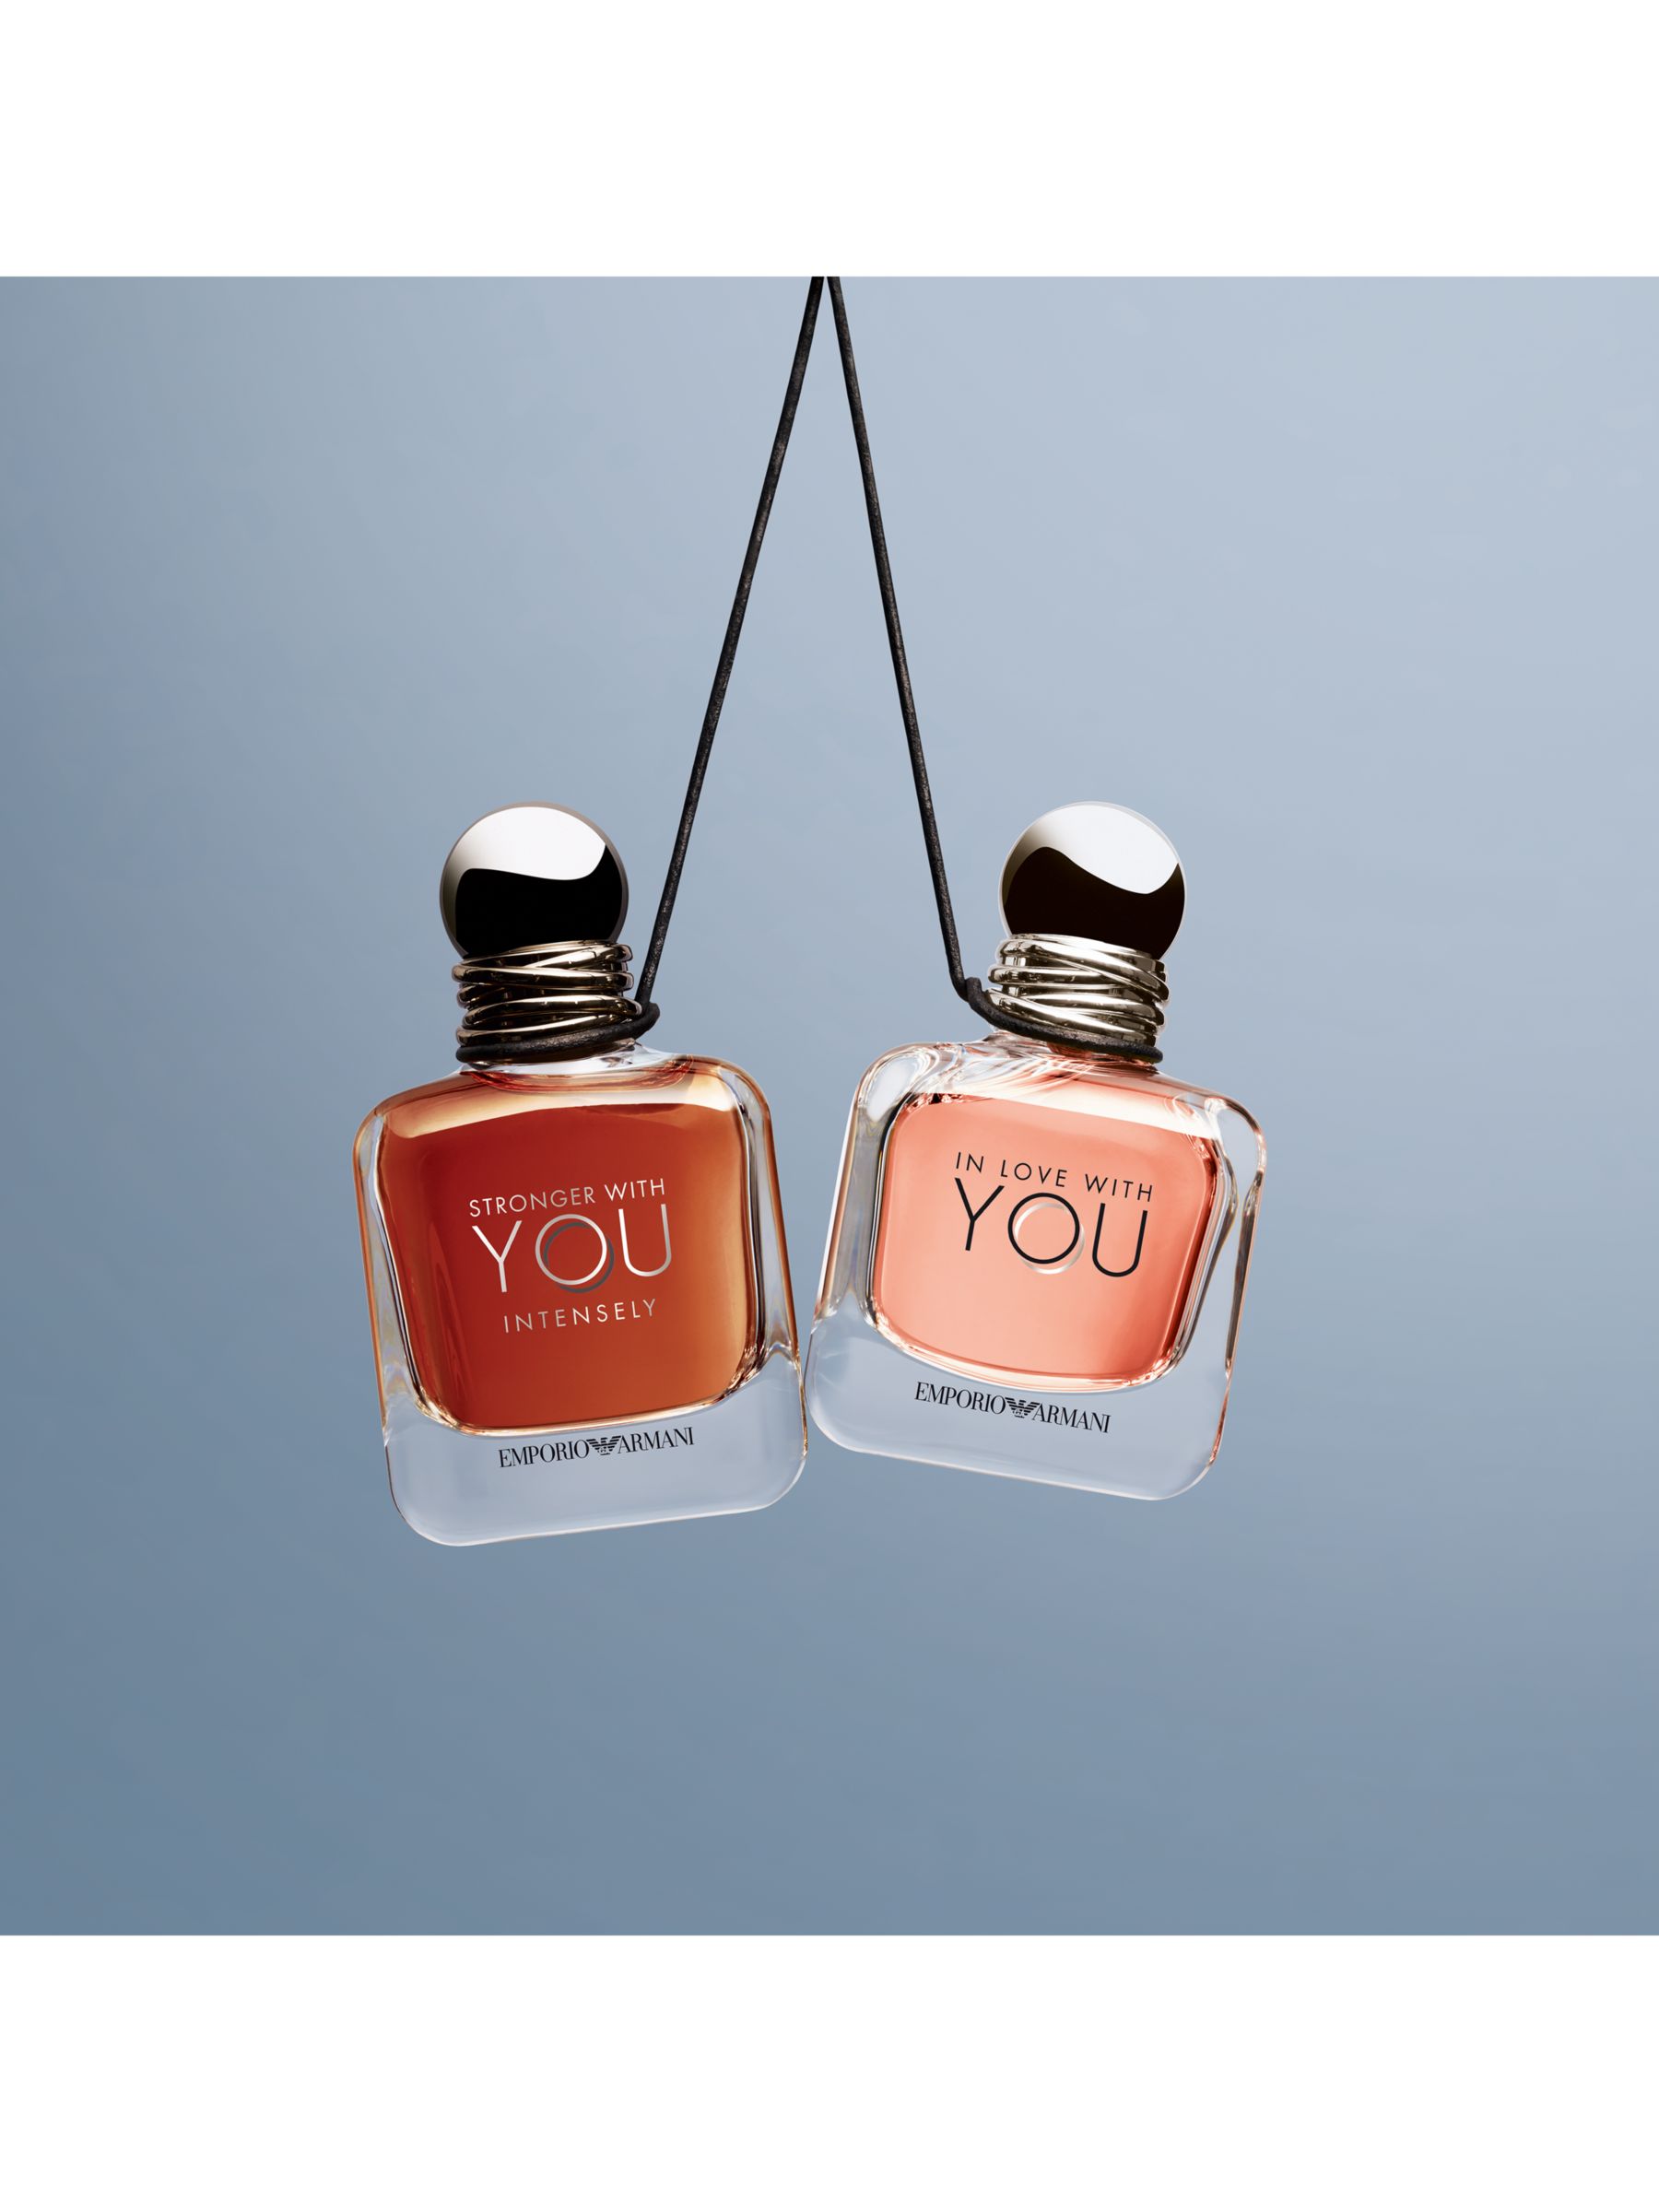 armani stronger with you 100ml